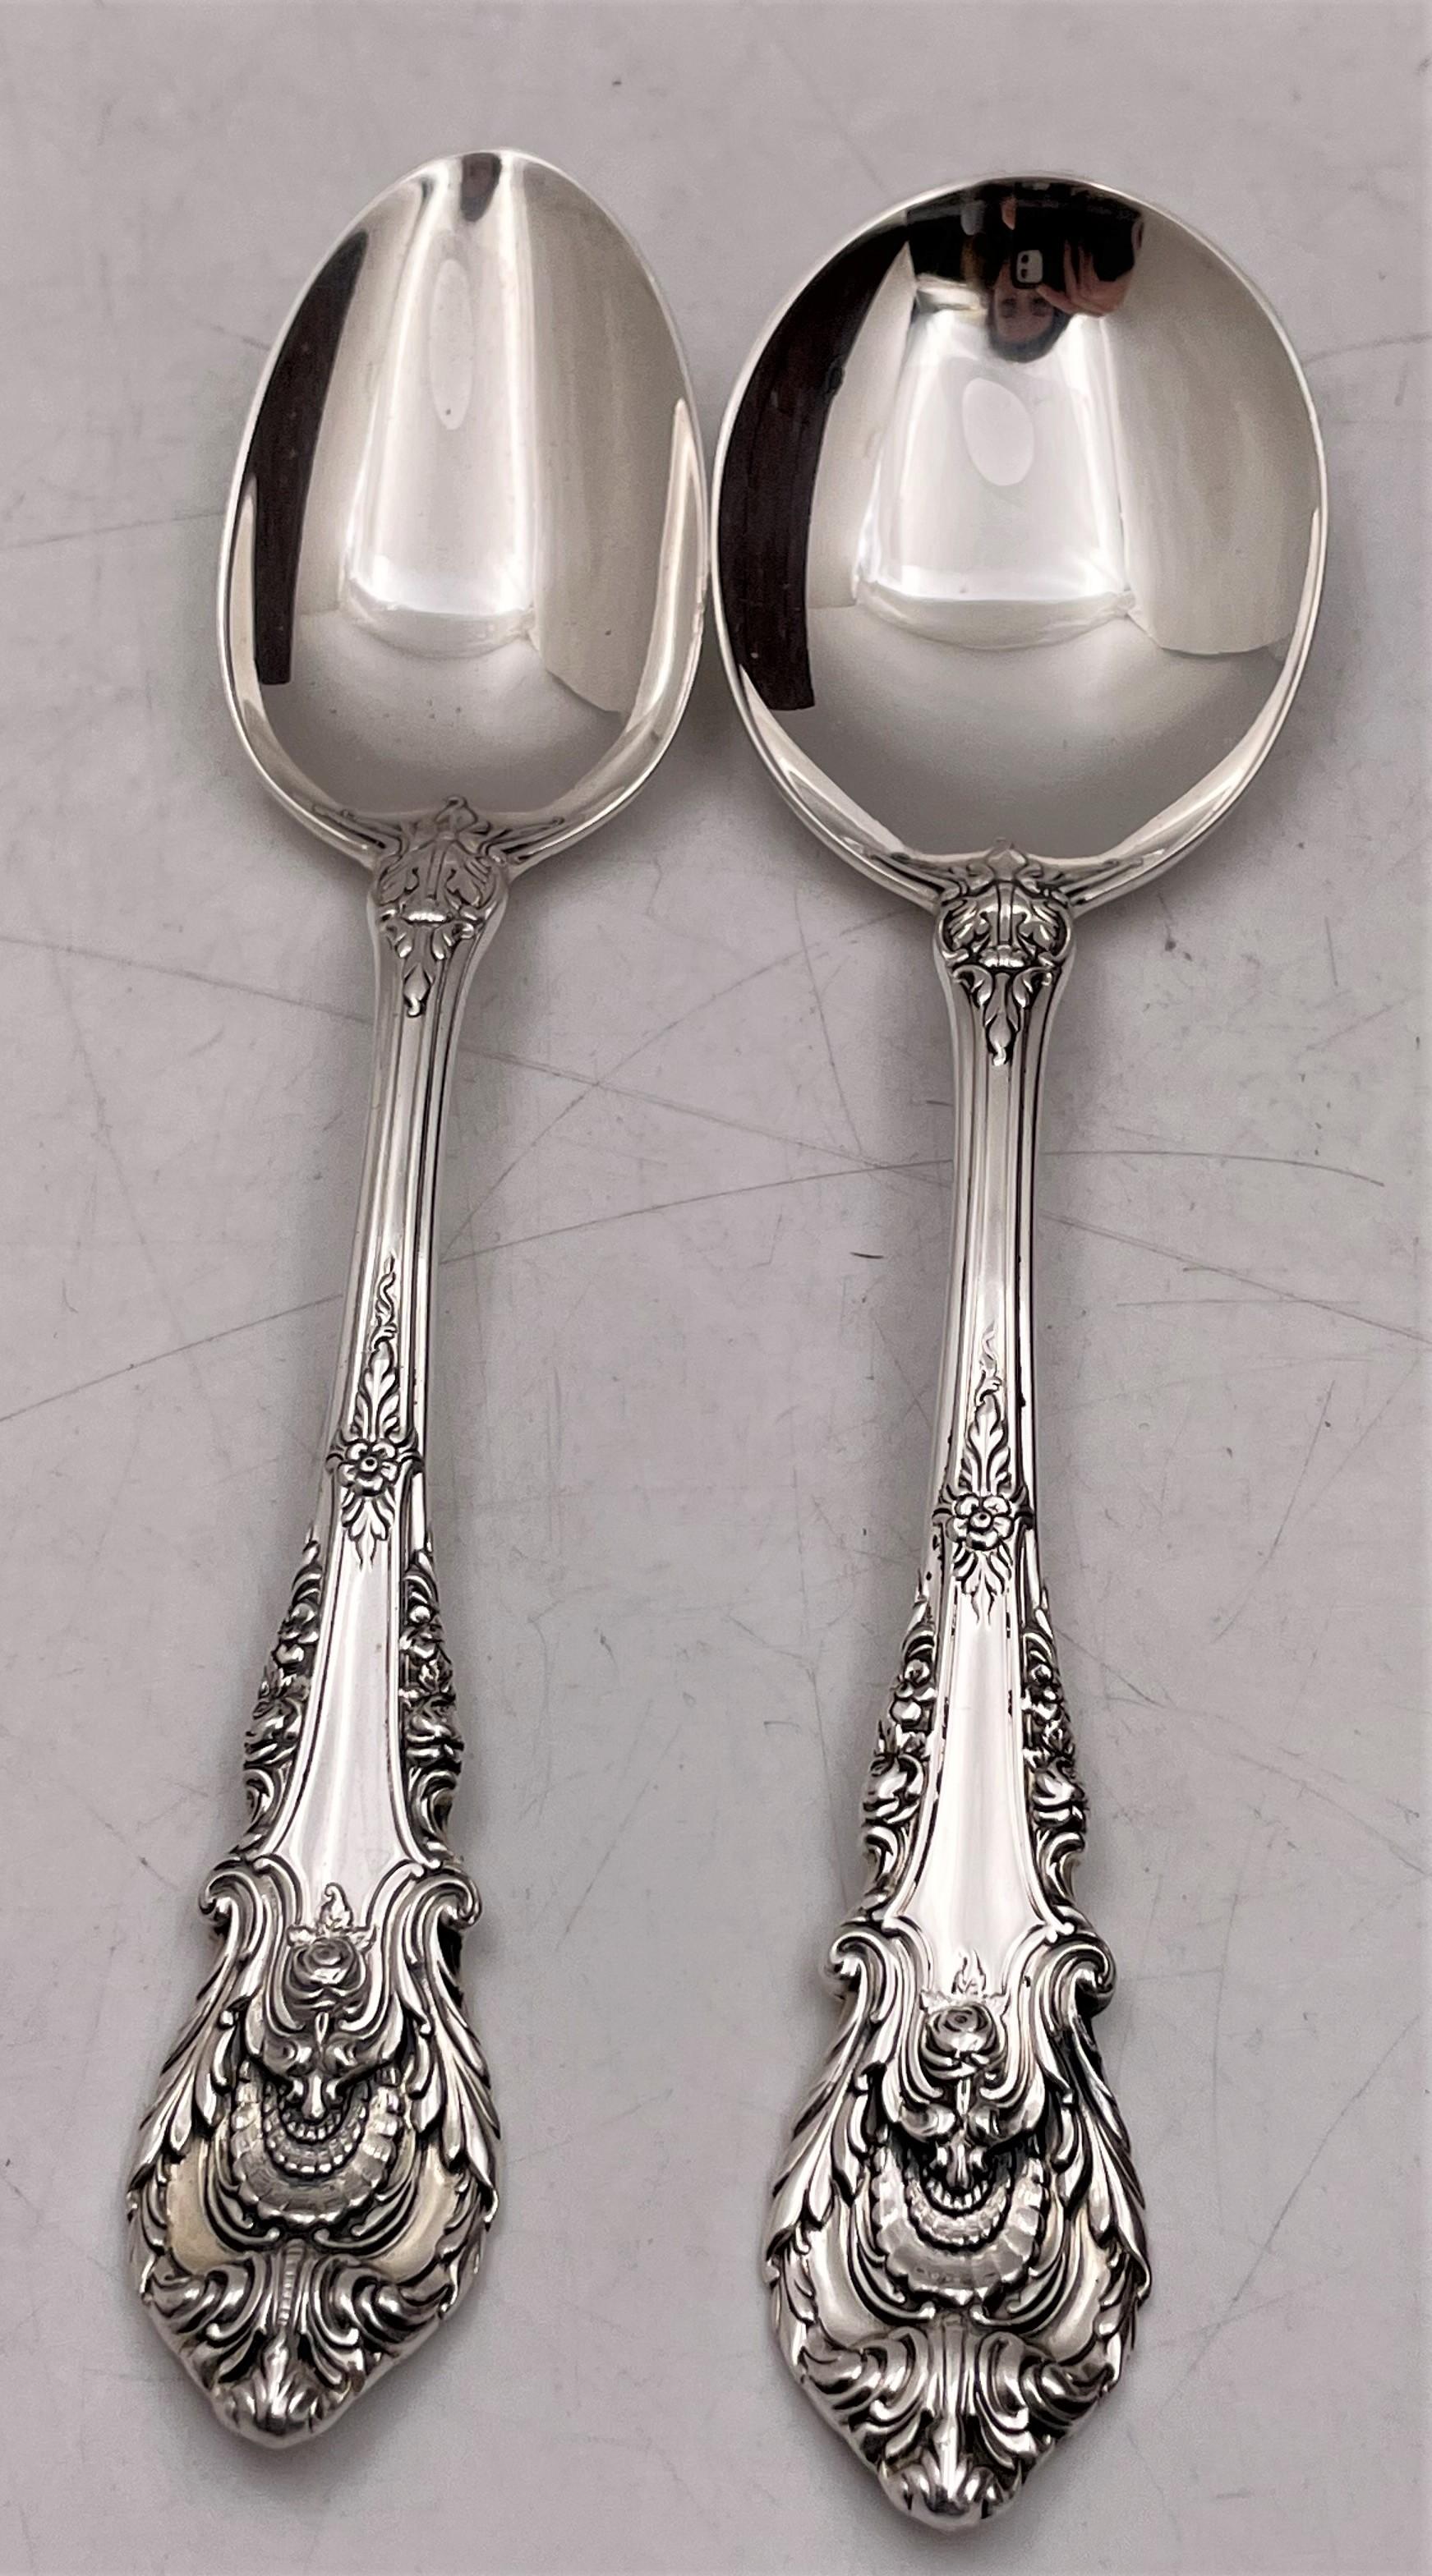 Wallace Sir Christopher Sterling Silver 88-Pc Dinner Flatware Set for 12+Servers For Sale 4